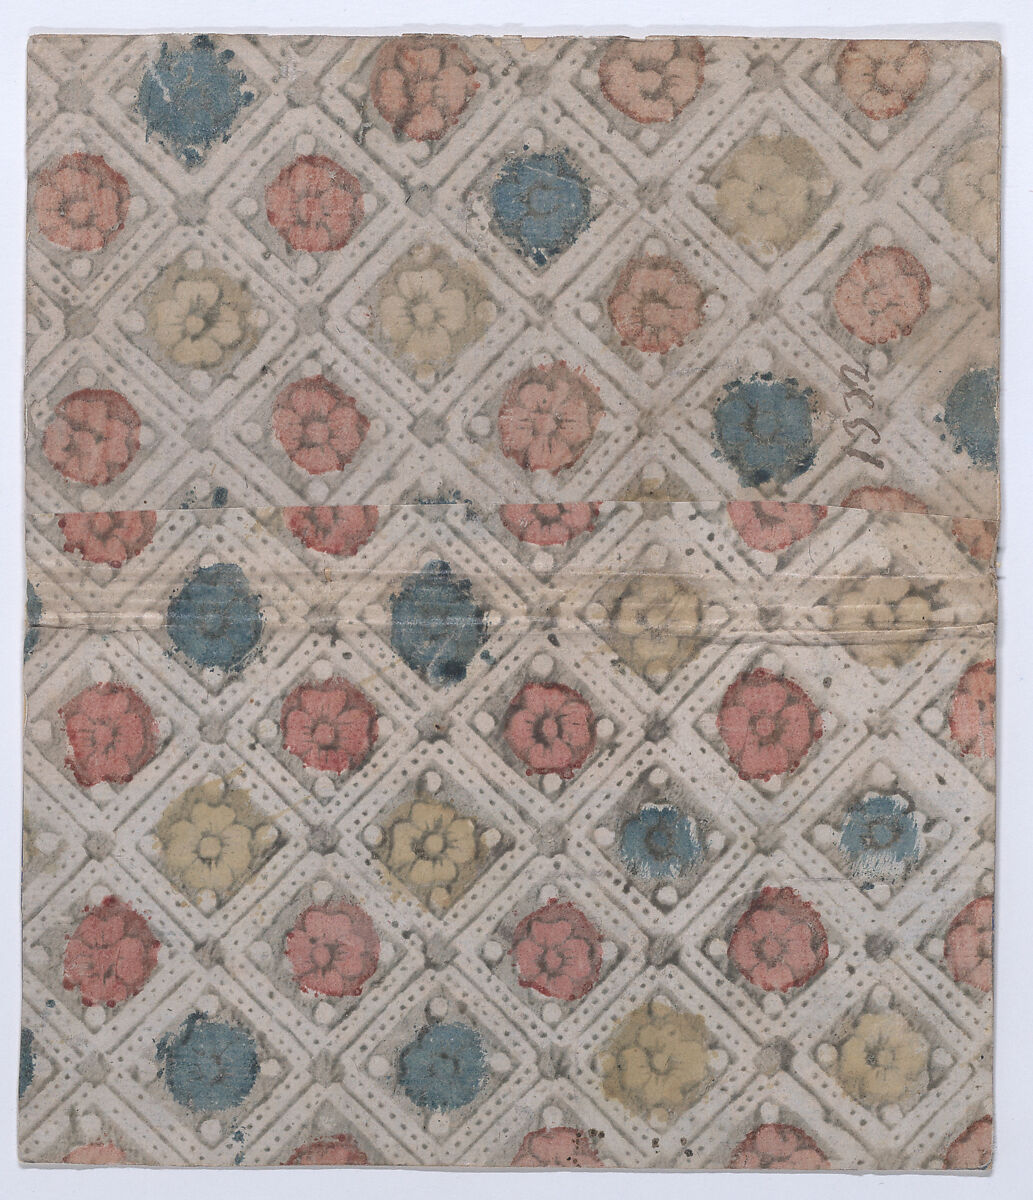 Book cover with overall pattern of rosettes, Anonymous  , 19th century, Relief print (wood or metal) 